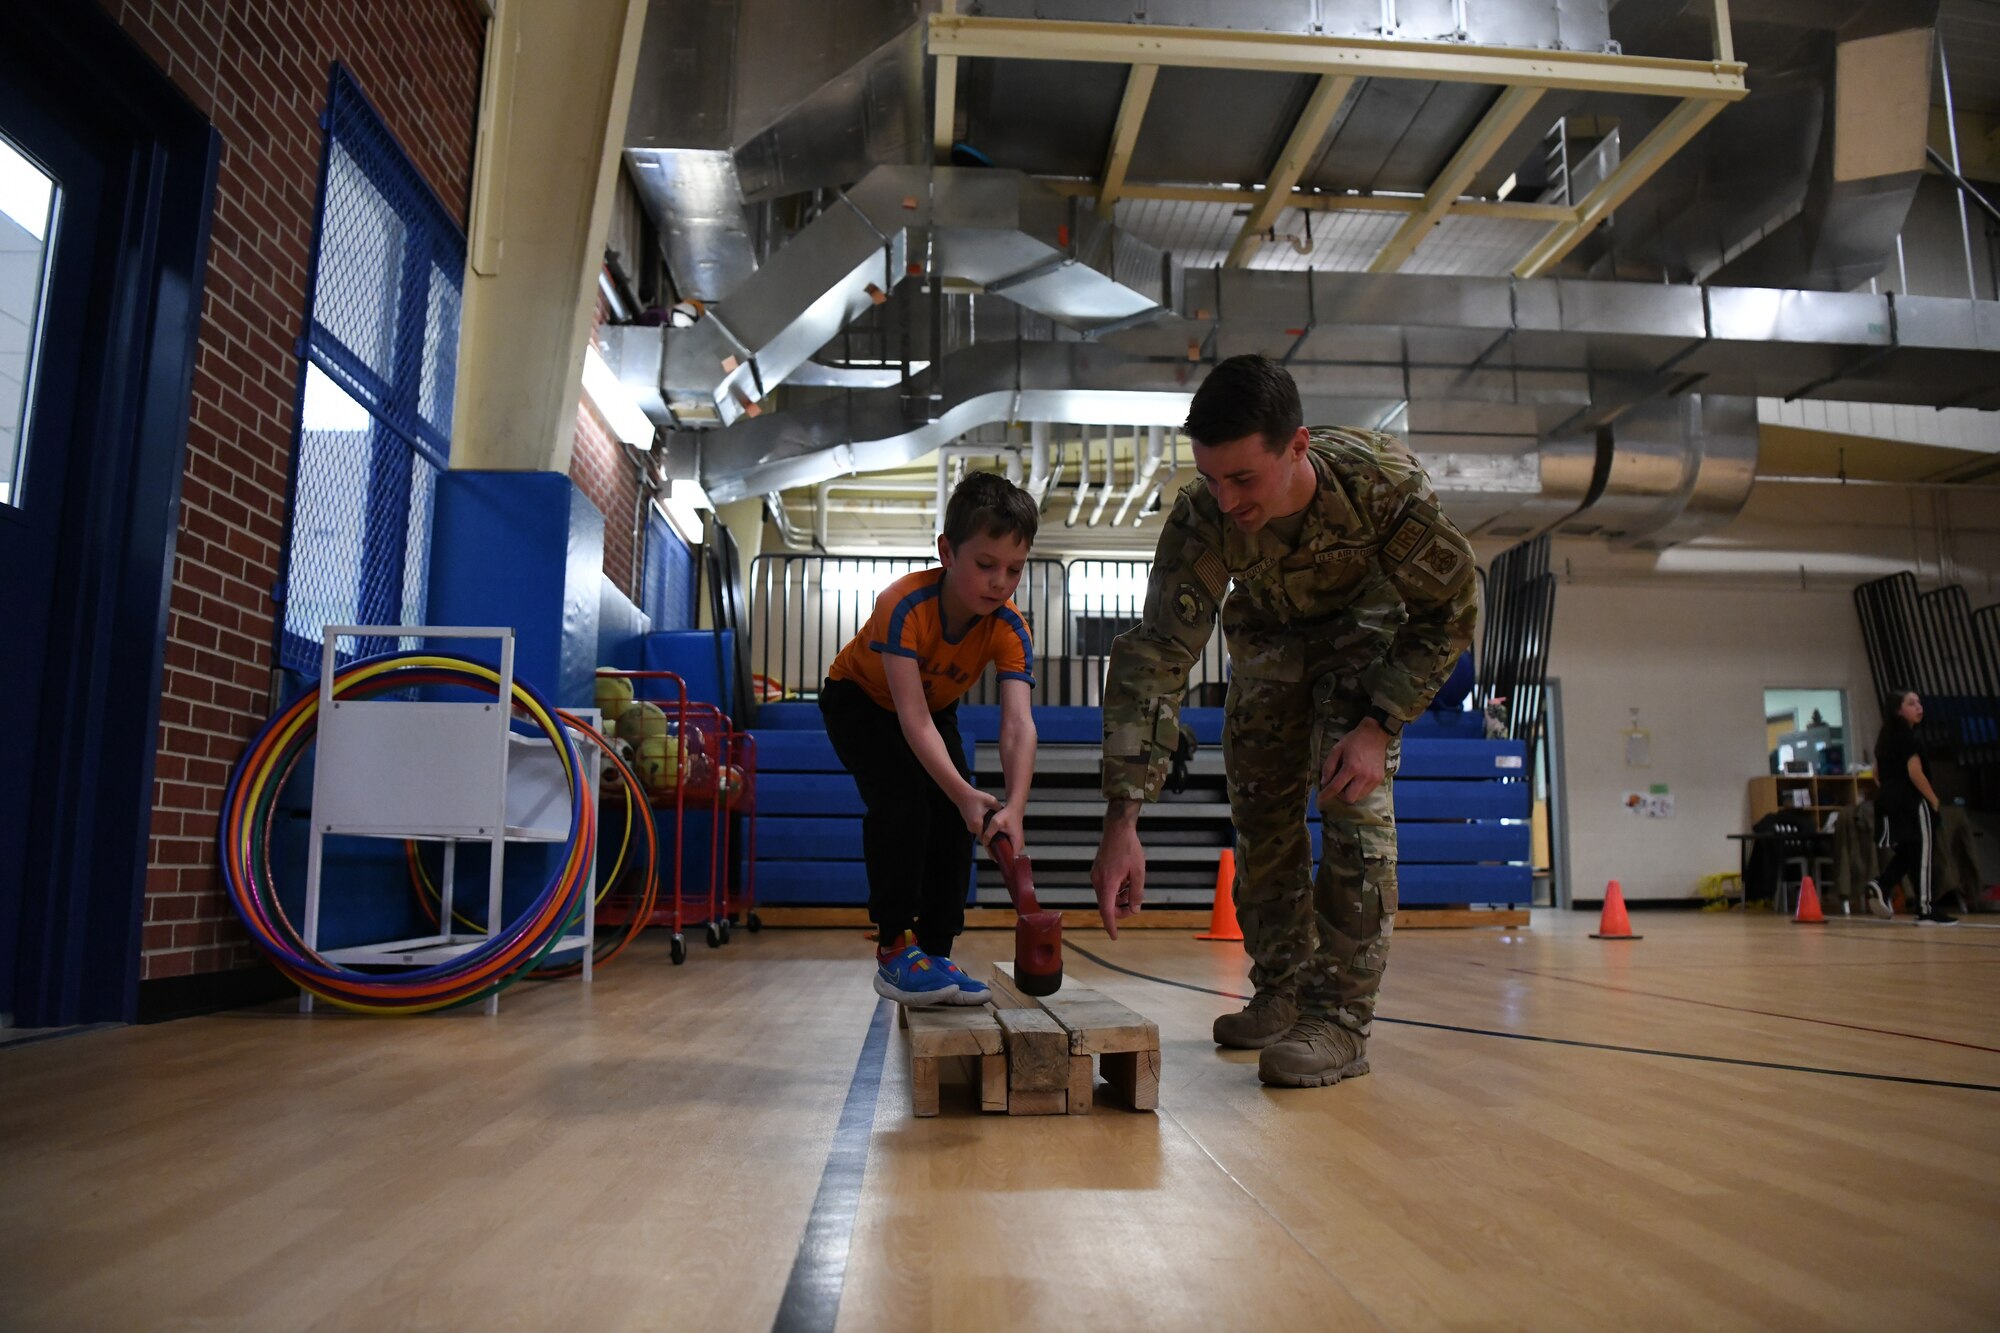 Airman Zachary Viddler, 319th Civil Engineer Squadron firefighter instructs a child how to operate the keiser force machine Oct. 14, 2022, during the junior fire fighter challenge at the youth center on Grand Forks Air Force Base, North Dakota. The 2022 Fire Prevention Week’s campaign was, “Fire won’t wait. Plan your escape.” Members of the fire department worked to educate the community about simple but important actions they can take to keep themselves and those around them safe from home fires. (U.S. Air Force Photo by Senior Airman Ashley Richards)